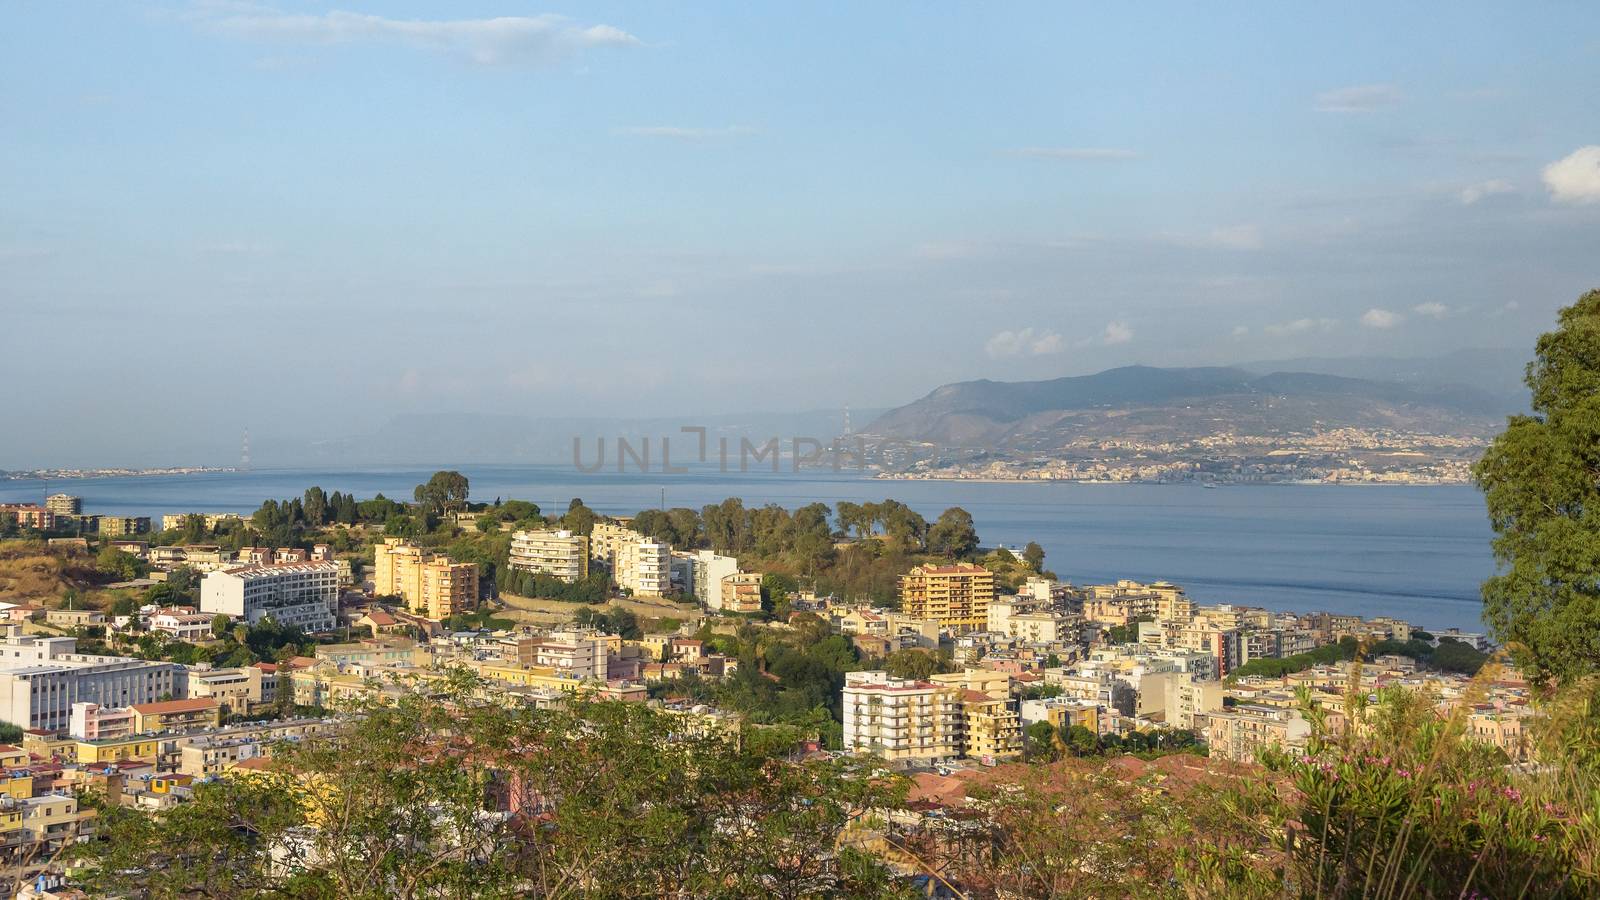 Afternoon view of Messina town with Messina strait in the background, Sicily, Italy